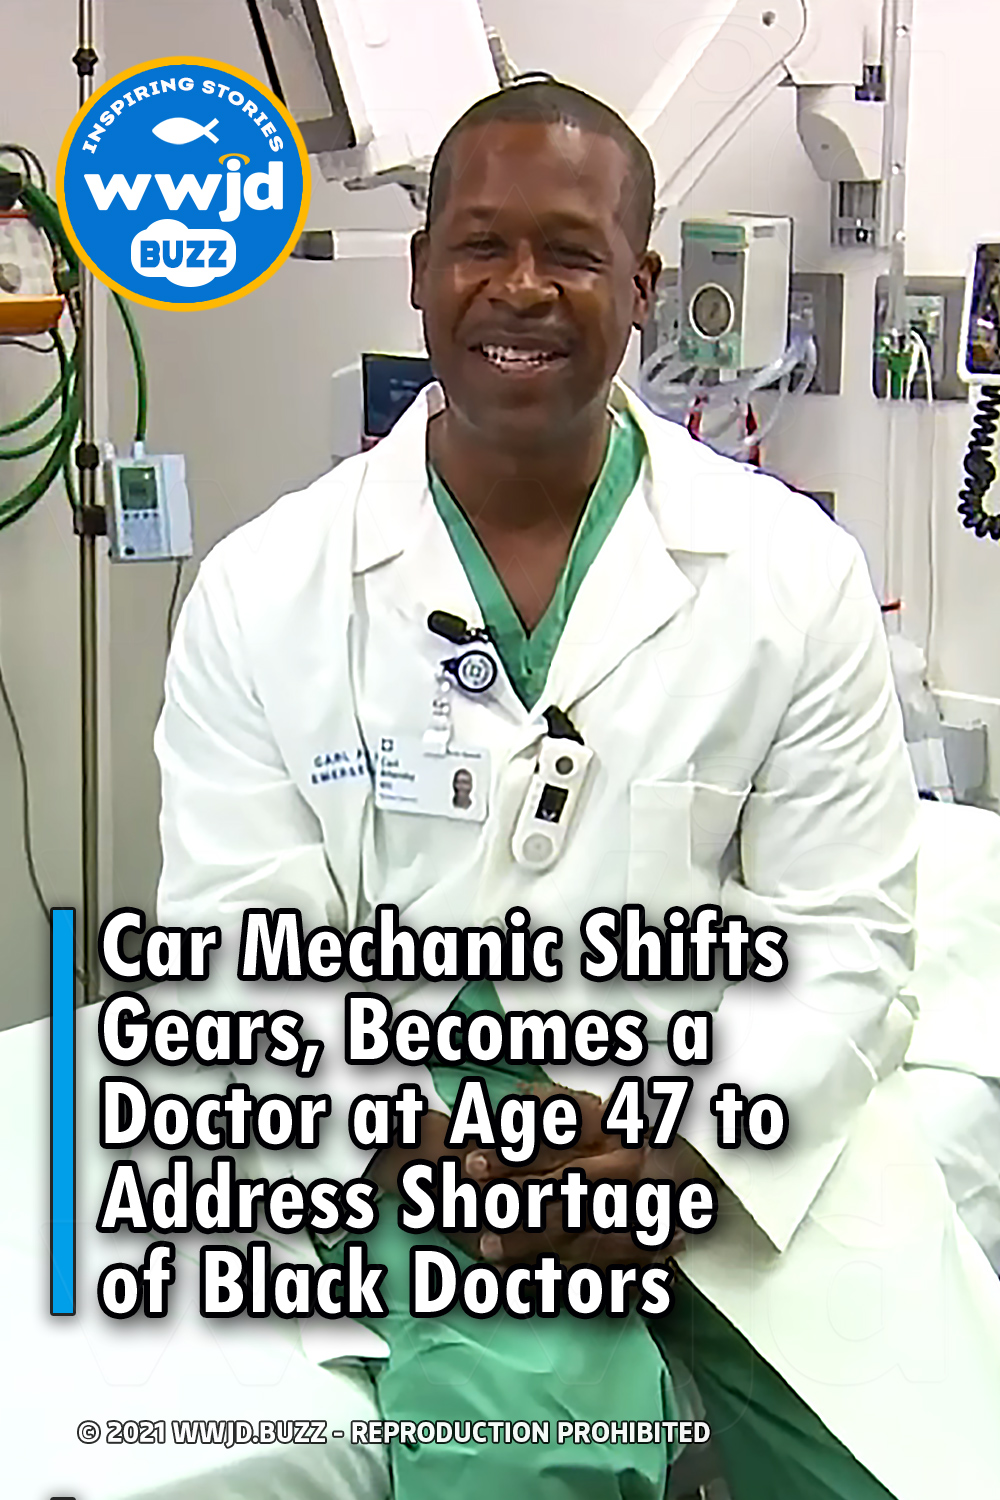 Car Mechanic Shifts Gears, Becomes a Doctor at Age 47 to Address Shortage of Black Doctors